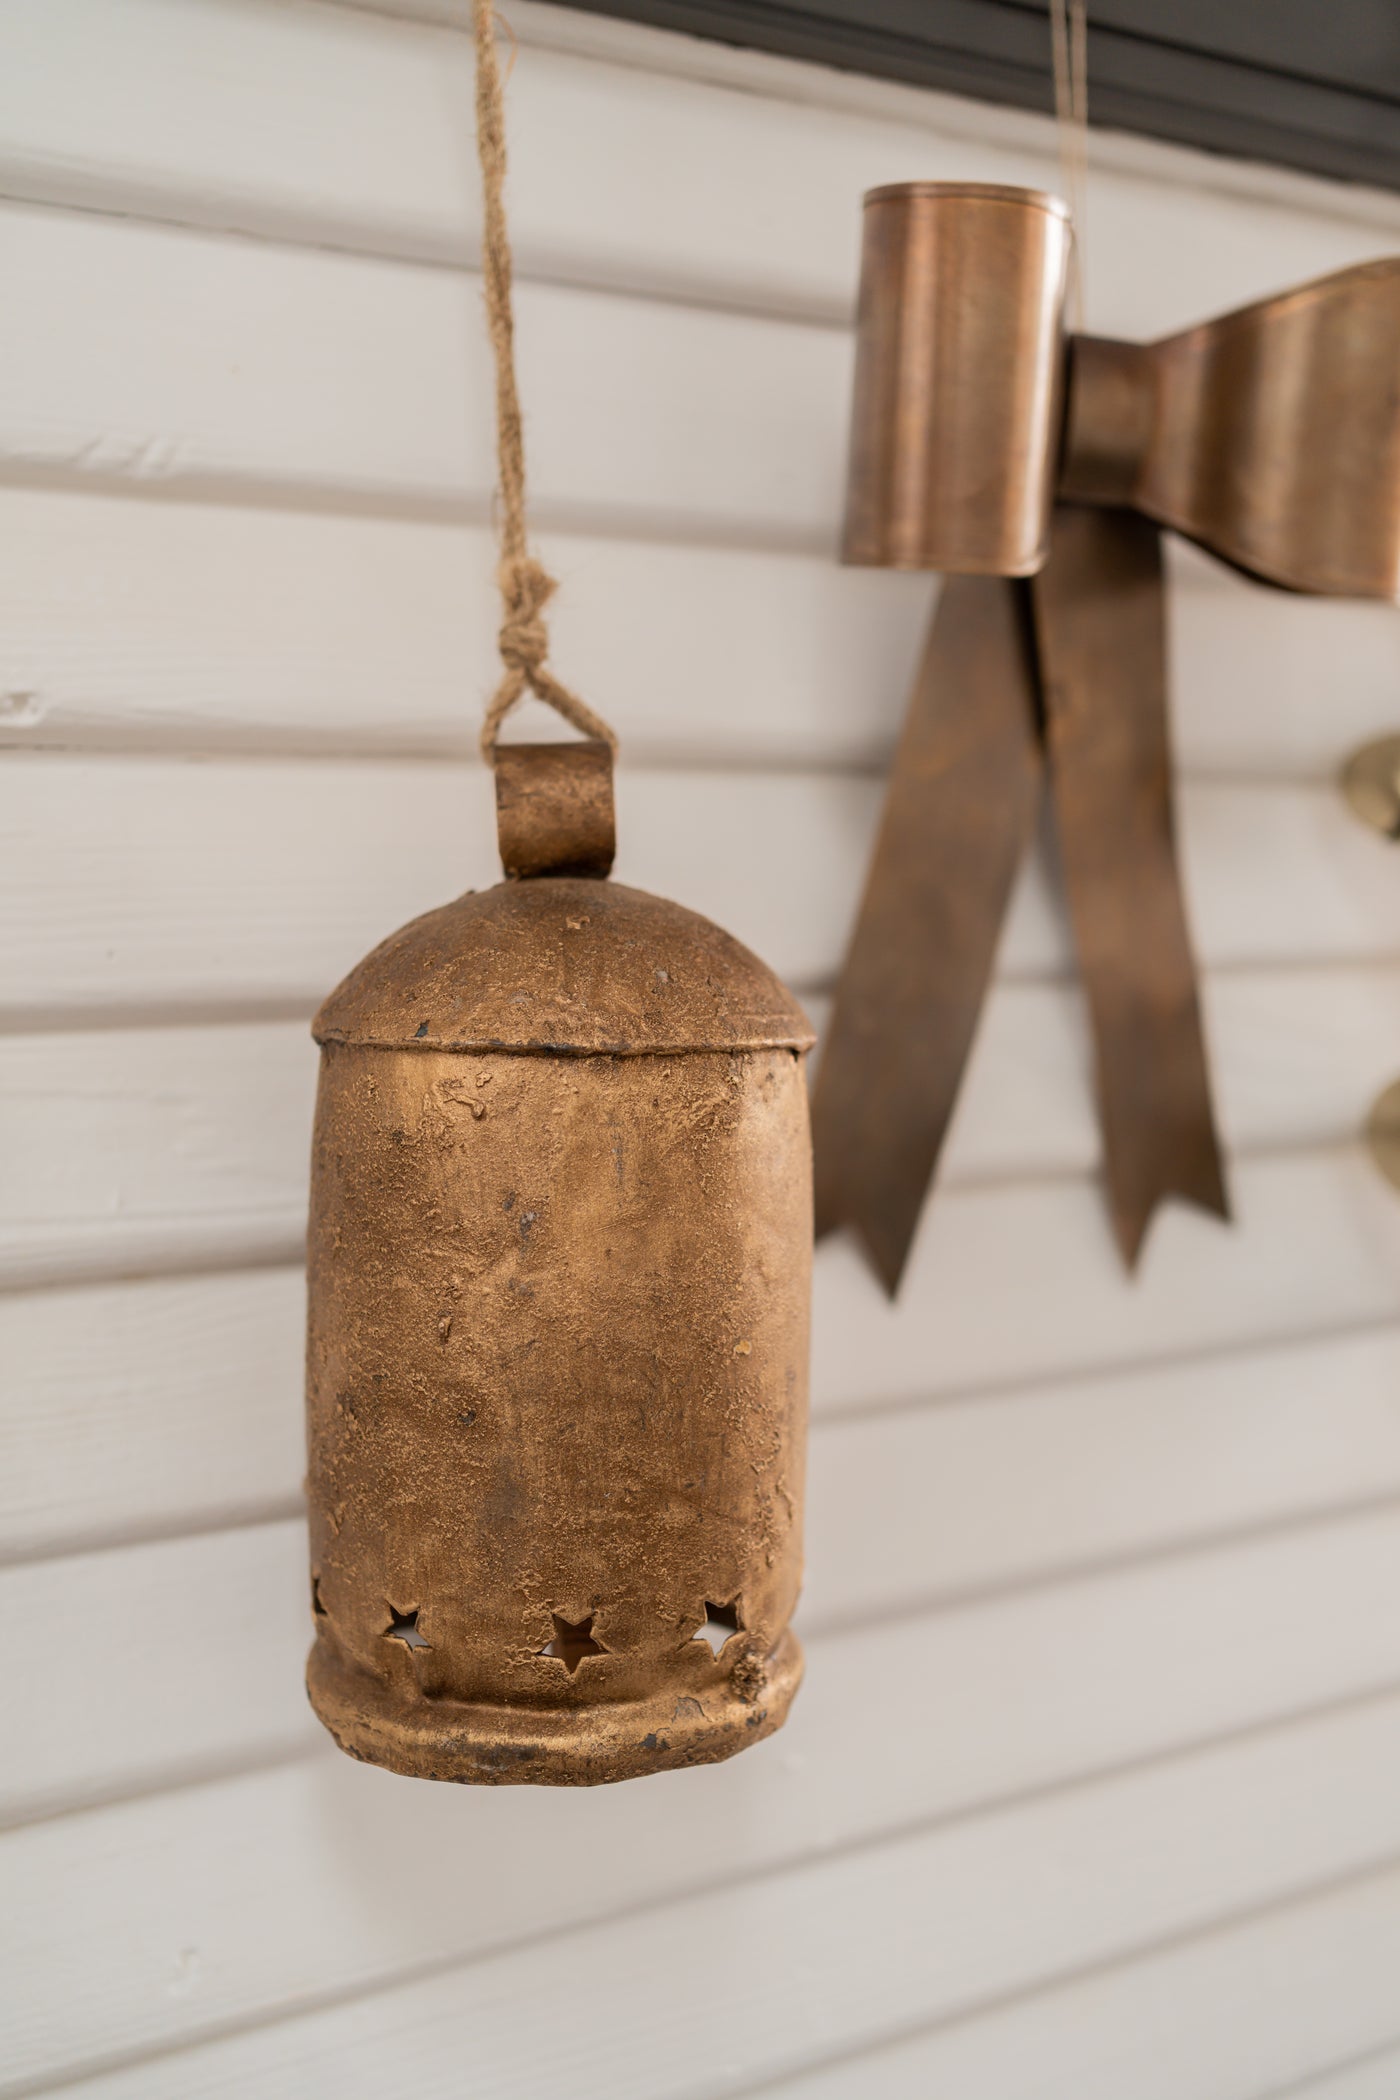 Iron Metal Bells with Star Cut-Outs - 3 Sizes